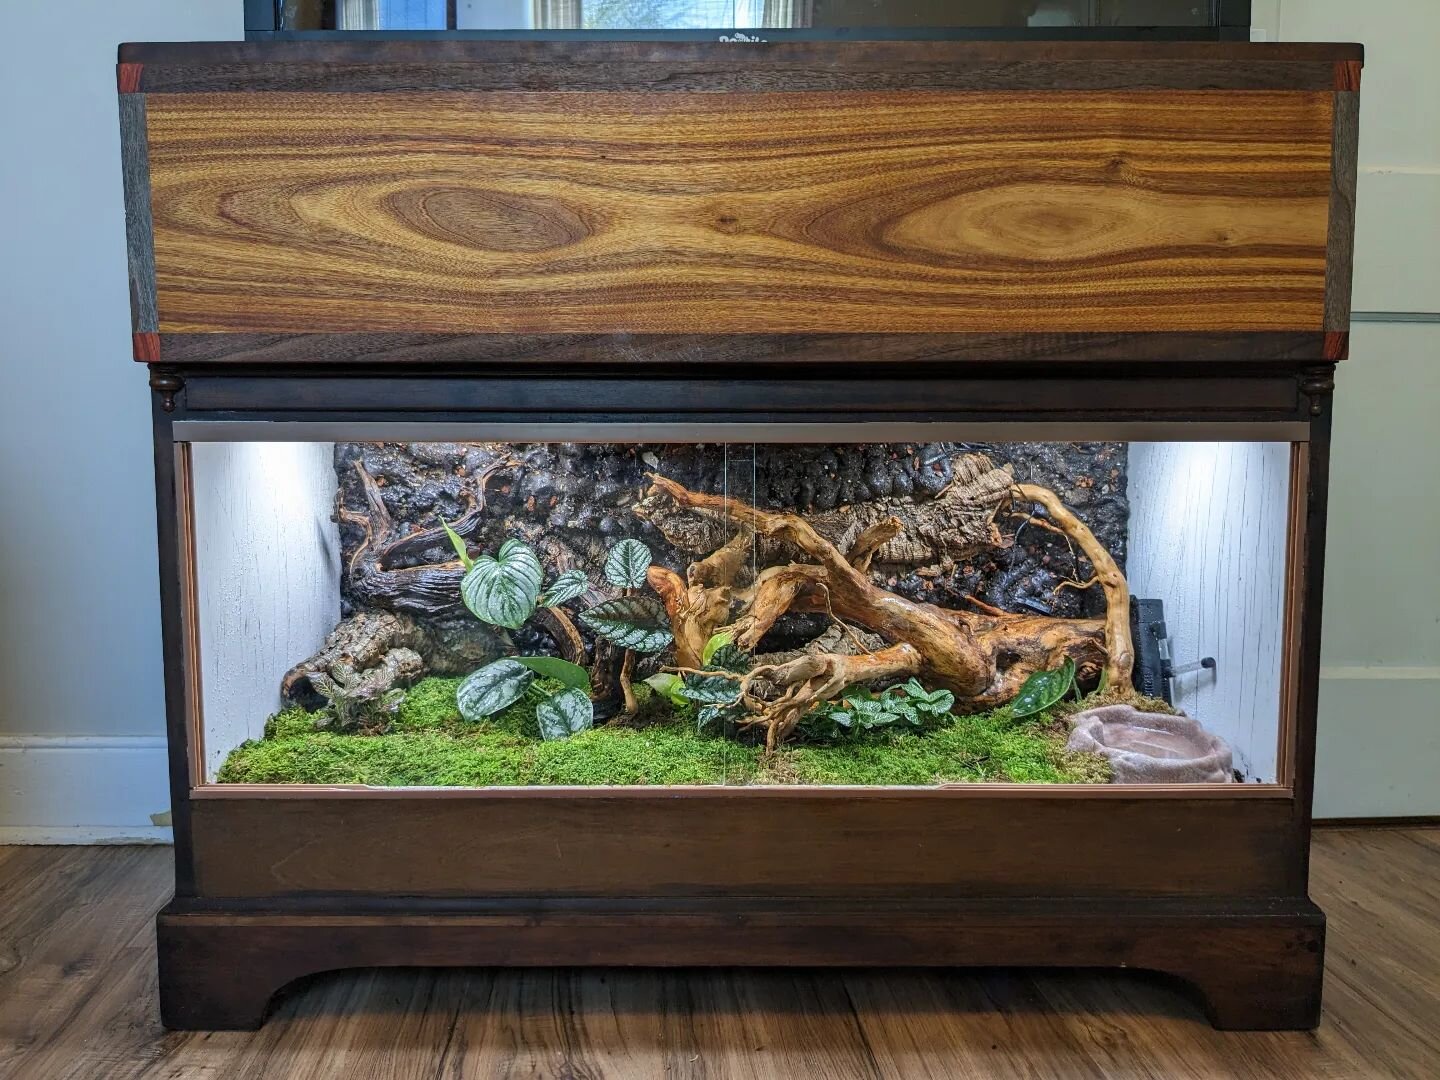 I got the tank all set up for Mazzarot and it turned out so much better than I even expected 😍
.
.
.
#hurricanewoodwork #needitbuildit #customtank #customenclosure #customsnaketank #customsnakeenclosure #finefurniture #reptileenclosure